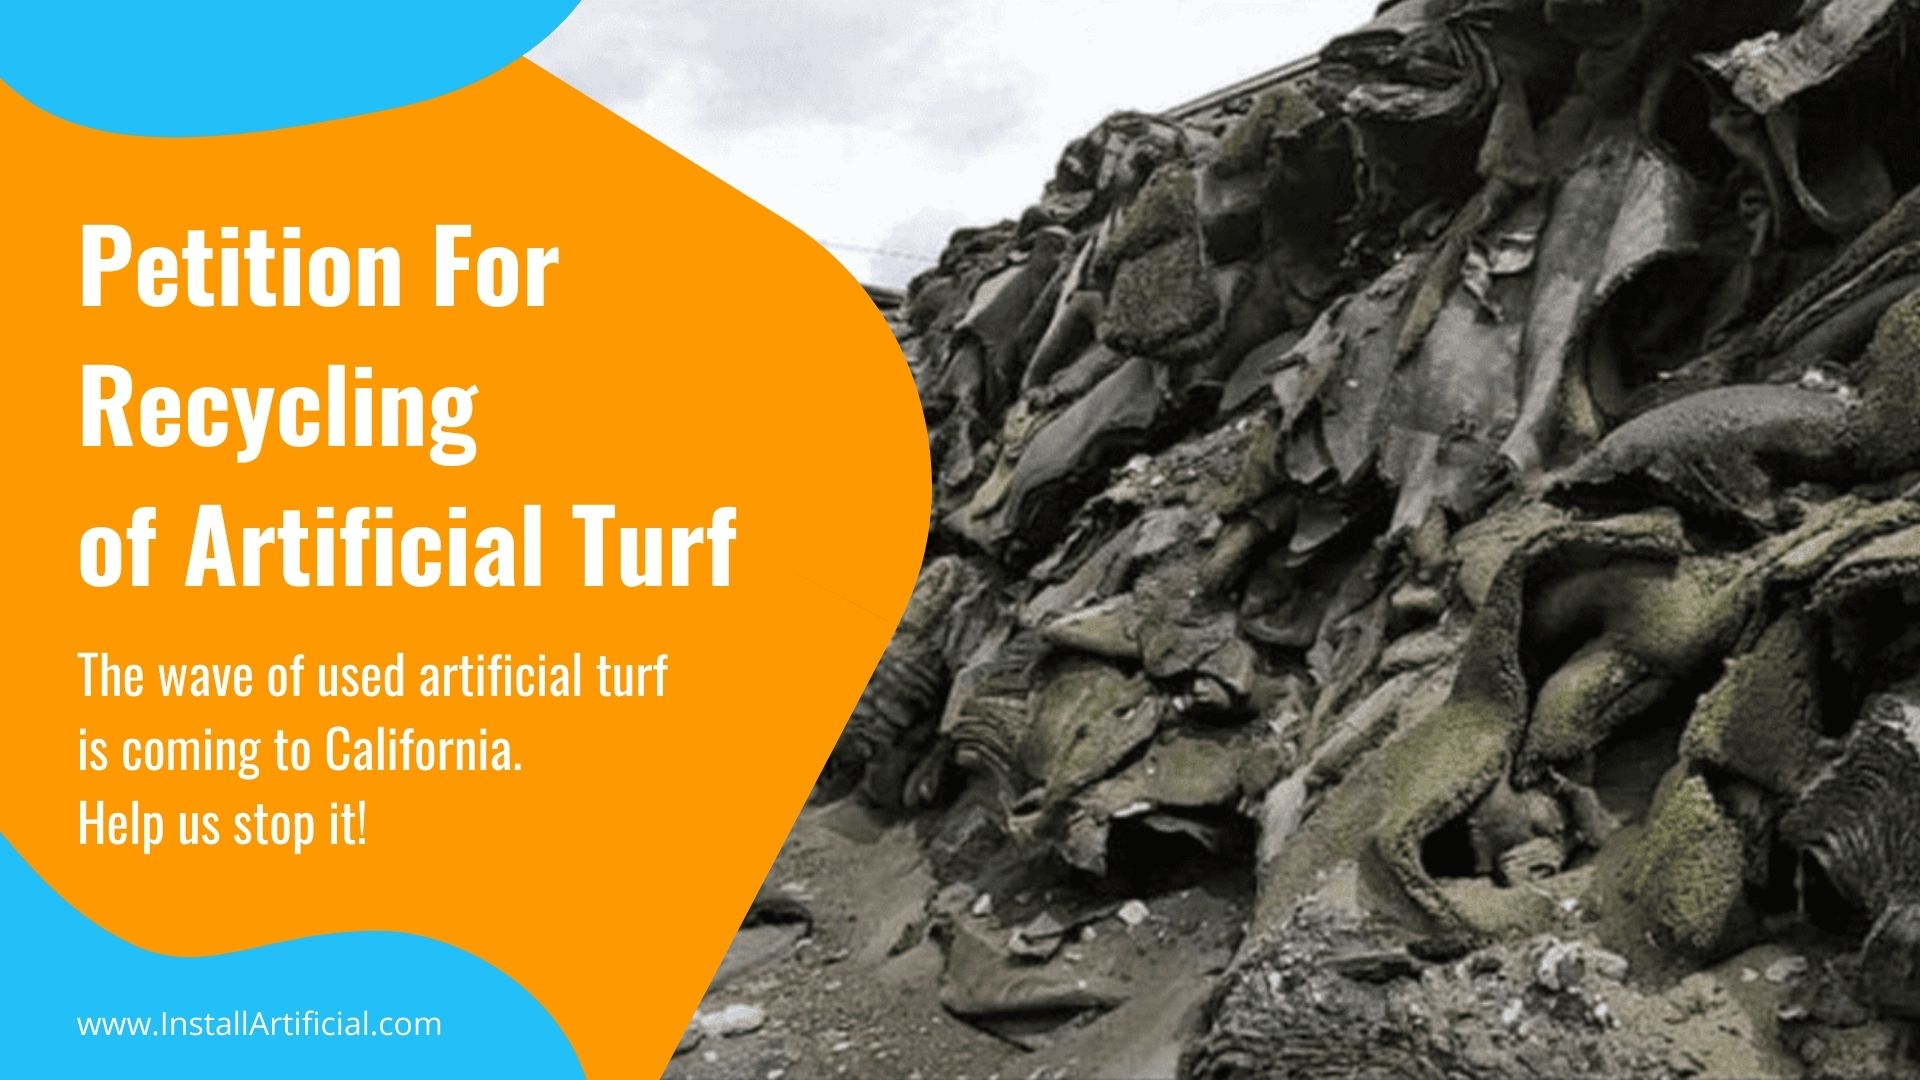 Petition for Artificial turf recycling